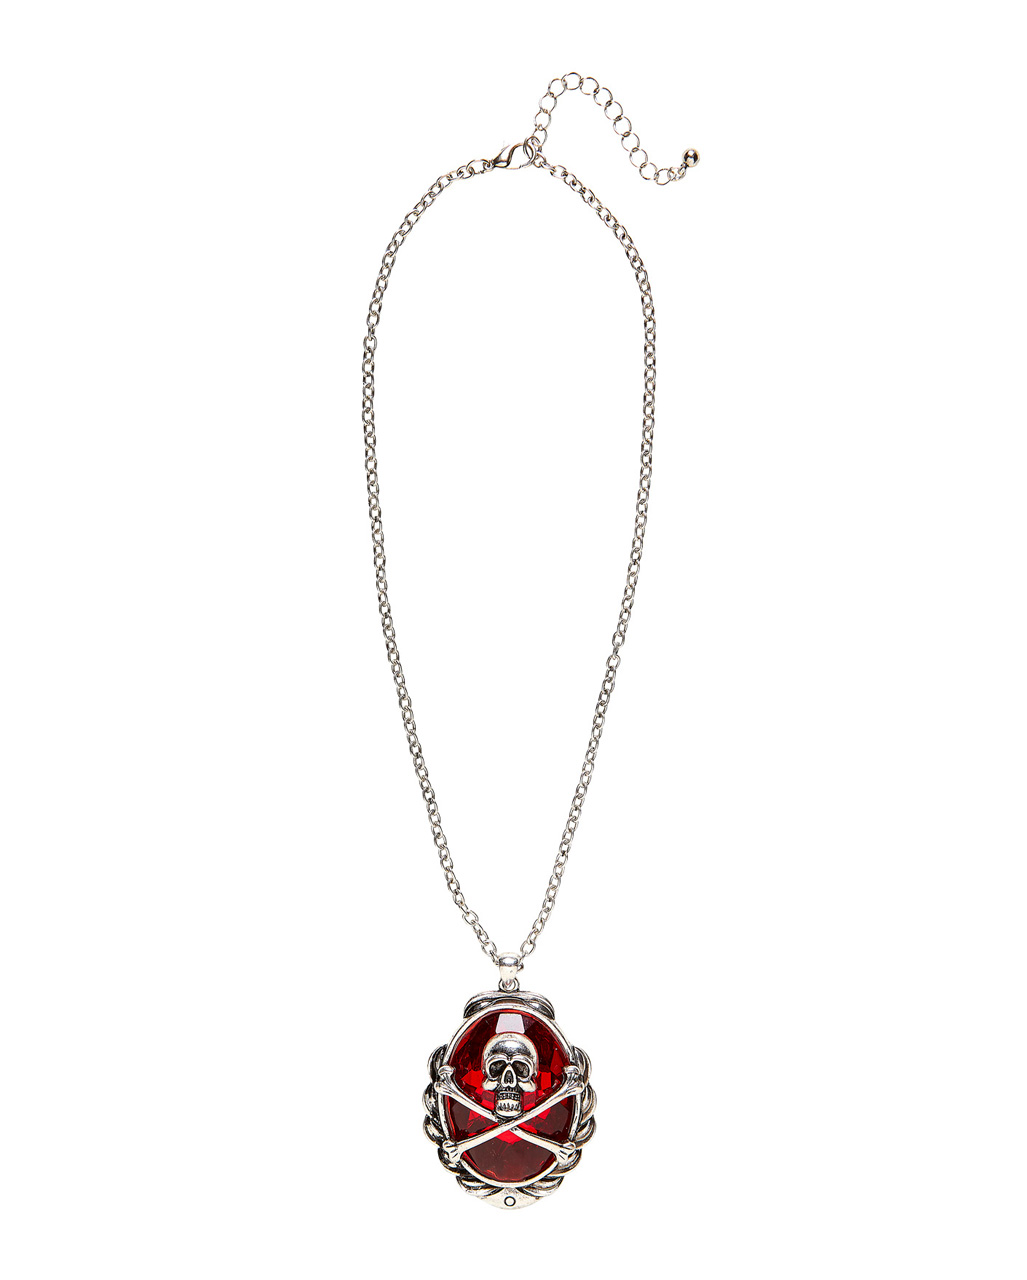 Pirate Necklace With Skull & Bones for Halloween